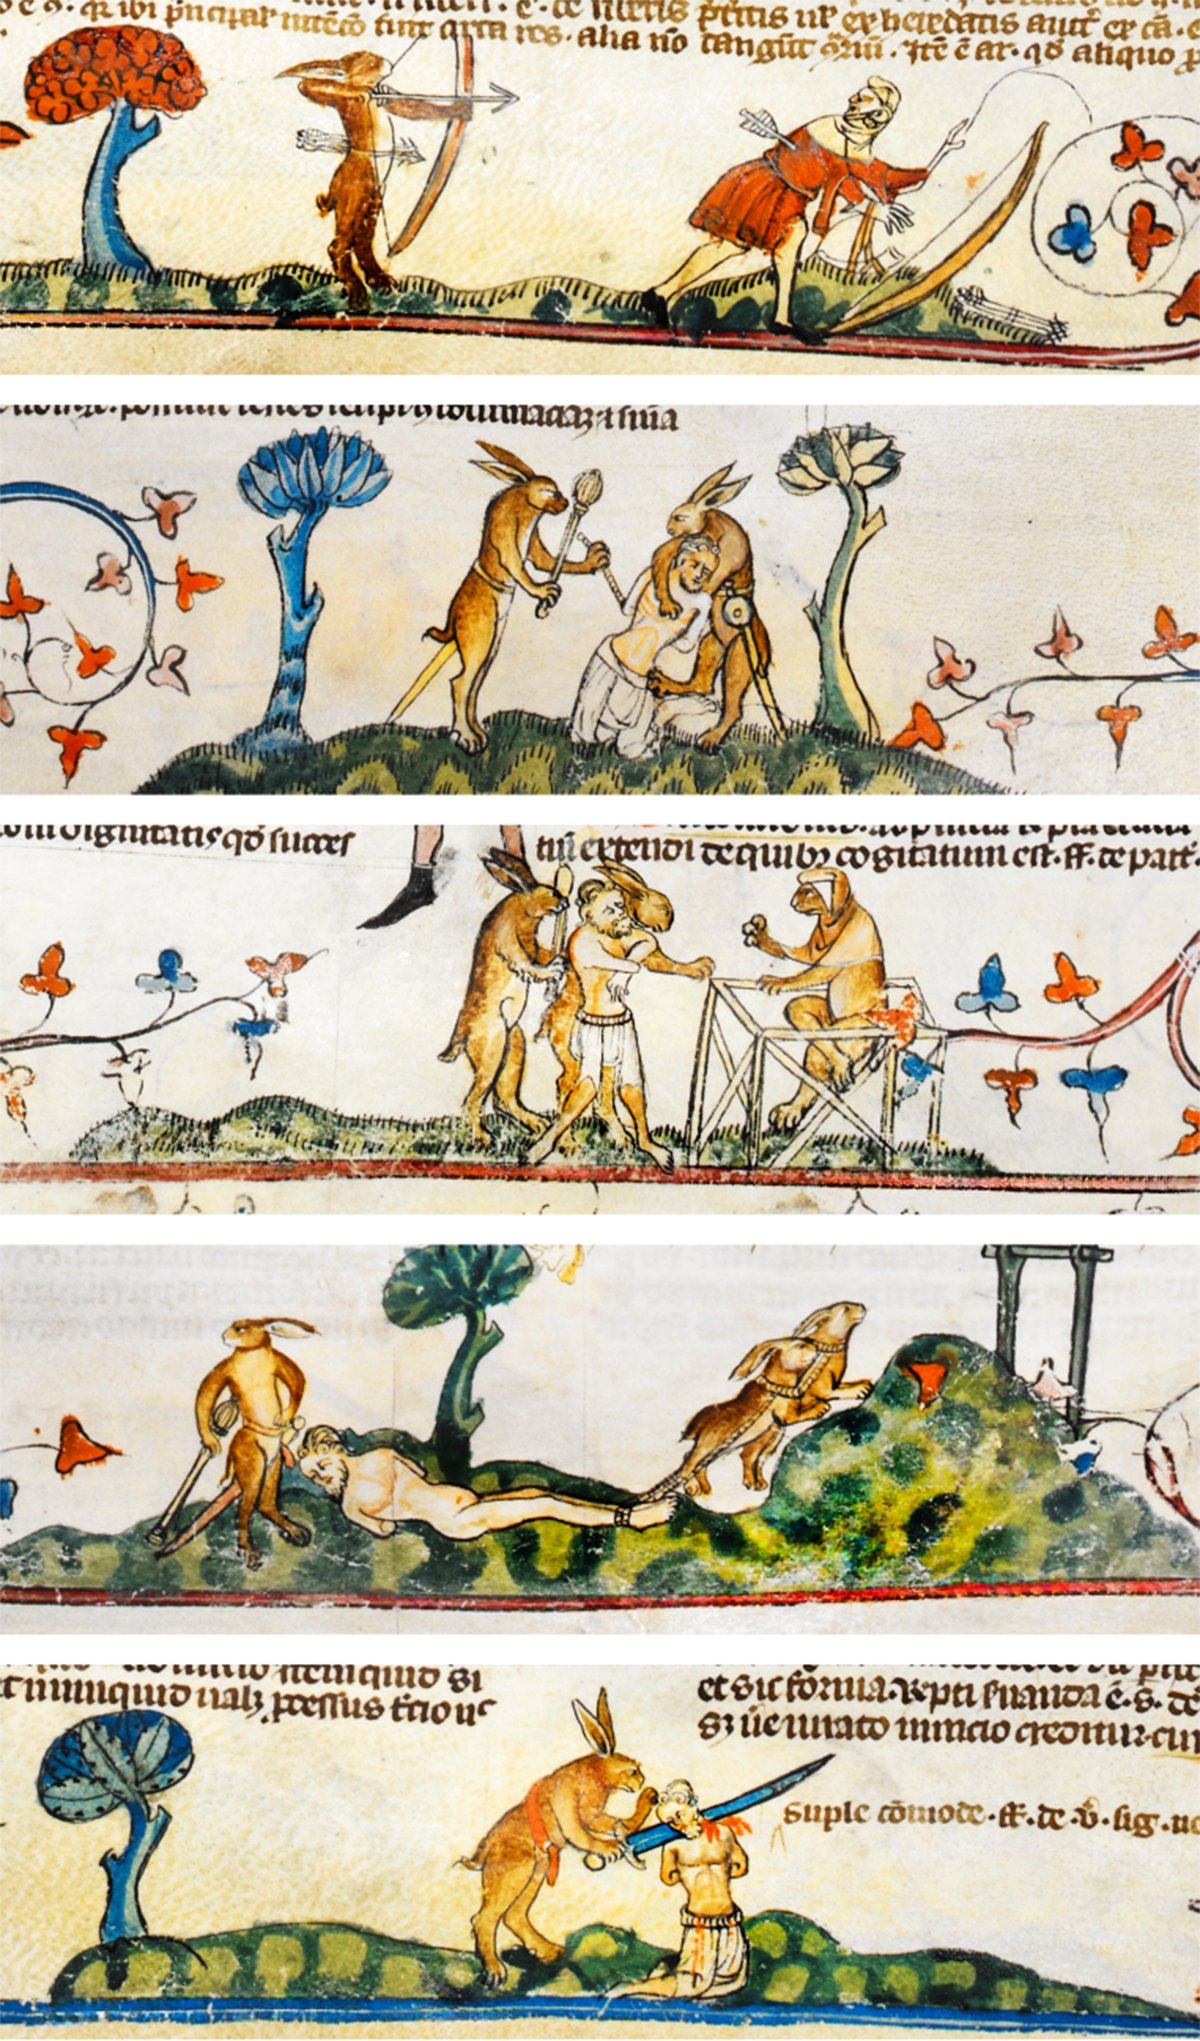 Five panels of a medieval manuscript with illustrations and text. The panels show giant rabbits taking revenge on a human hunter. The rabbits shoot arrows at the hunter’s back, tie him up, and drag him to a court. They find him guilty and chop his head off with a sword.